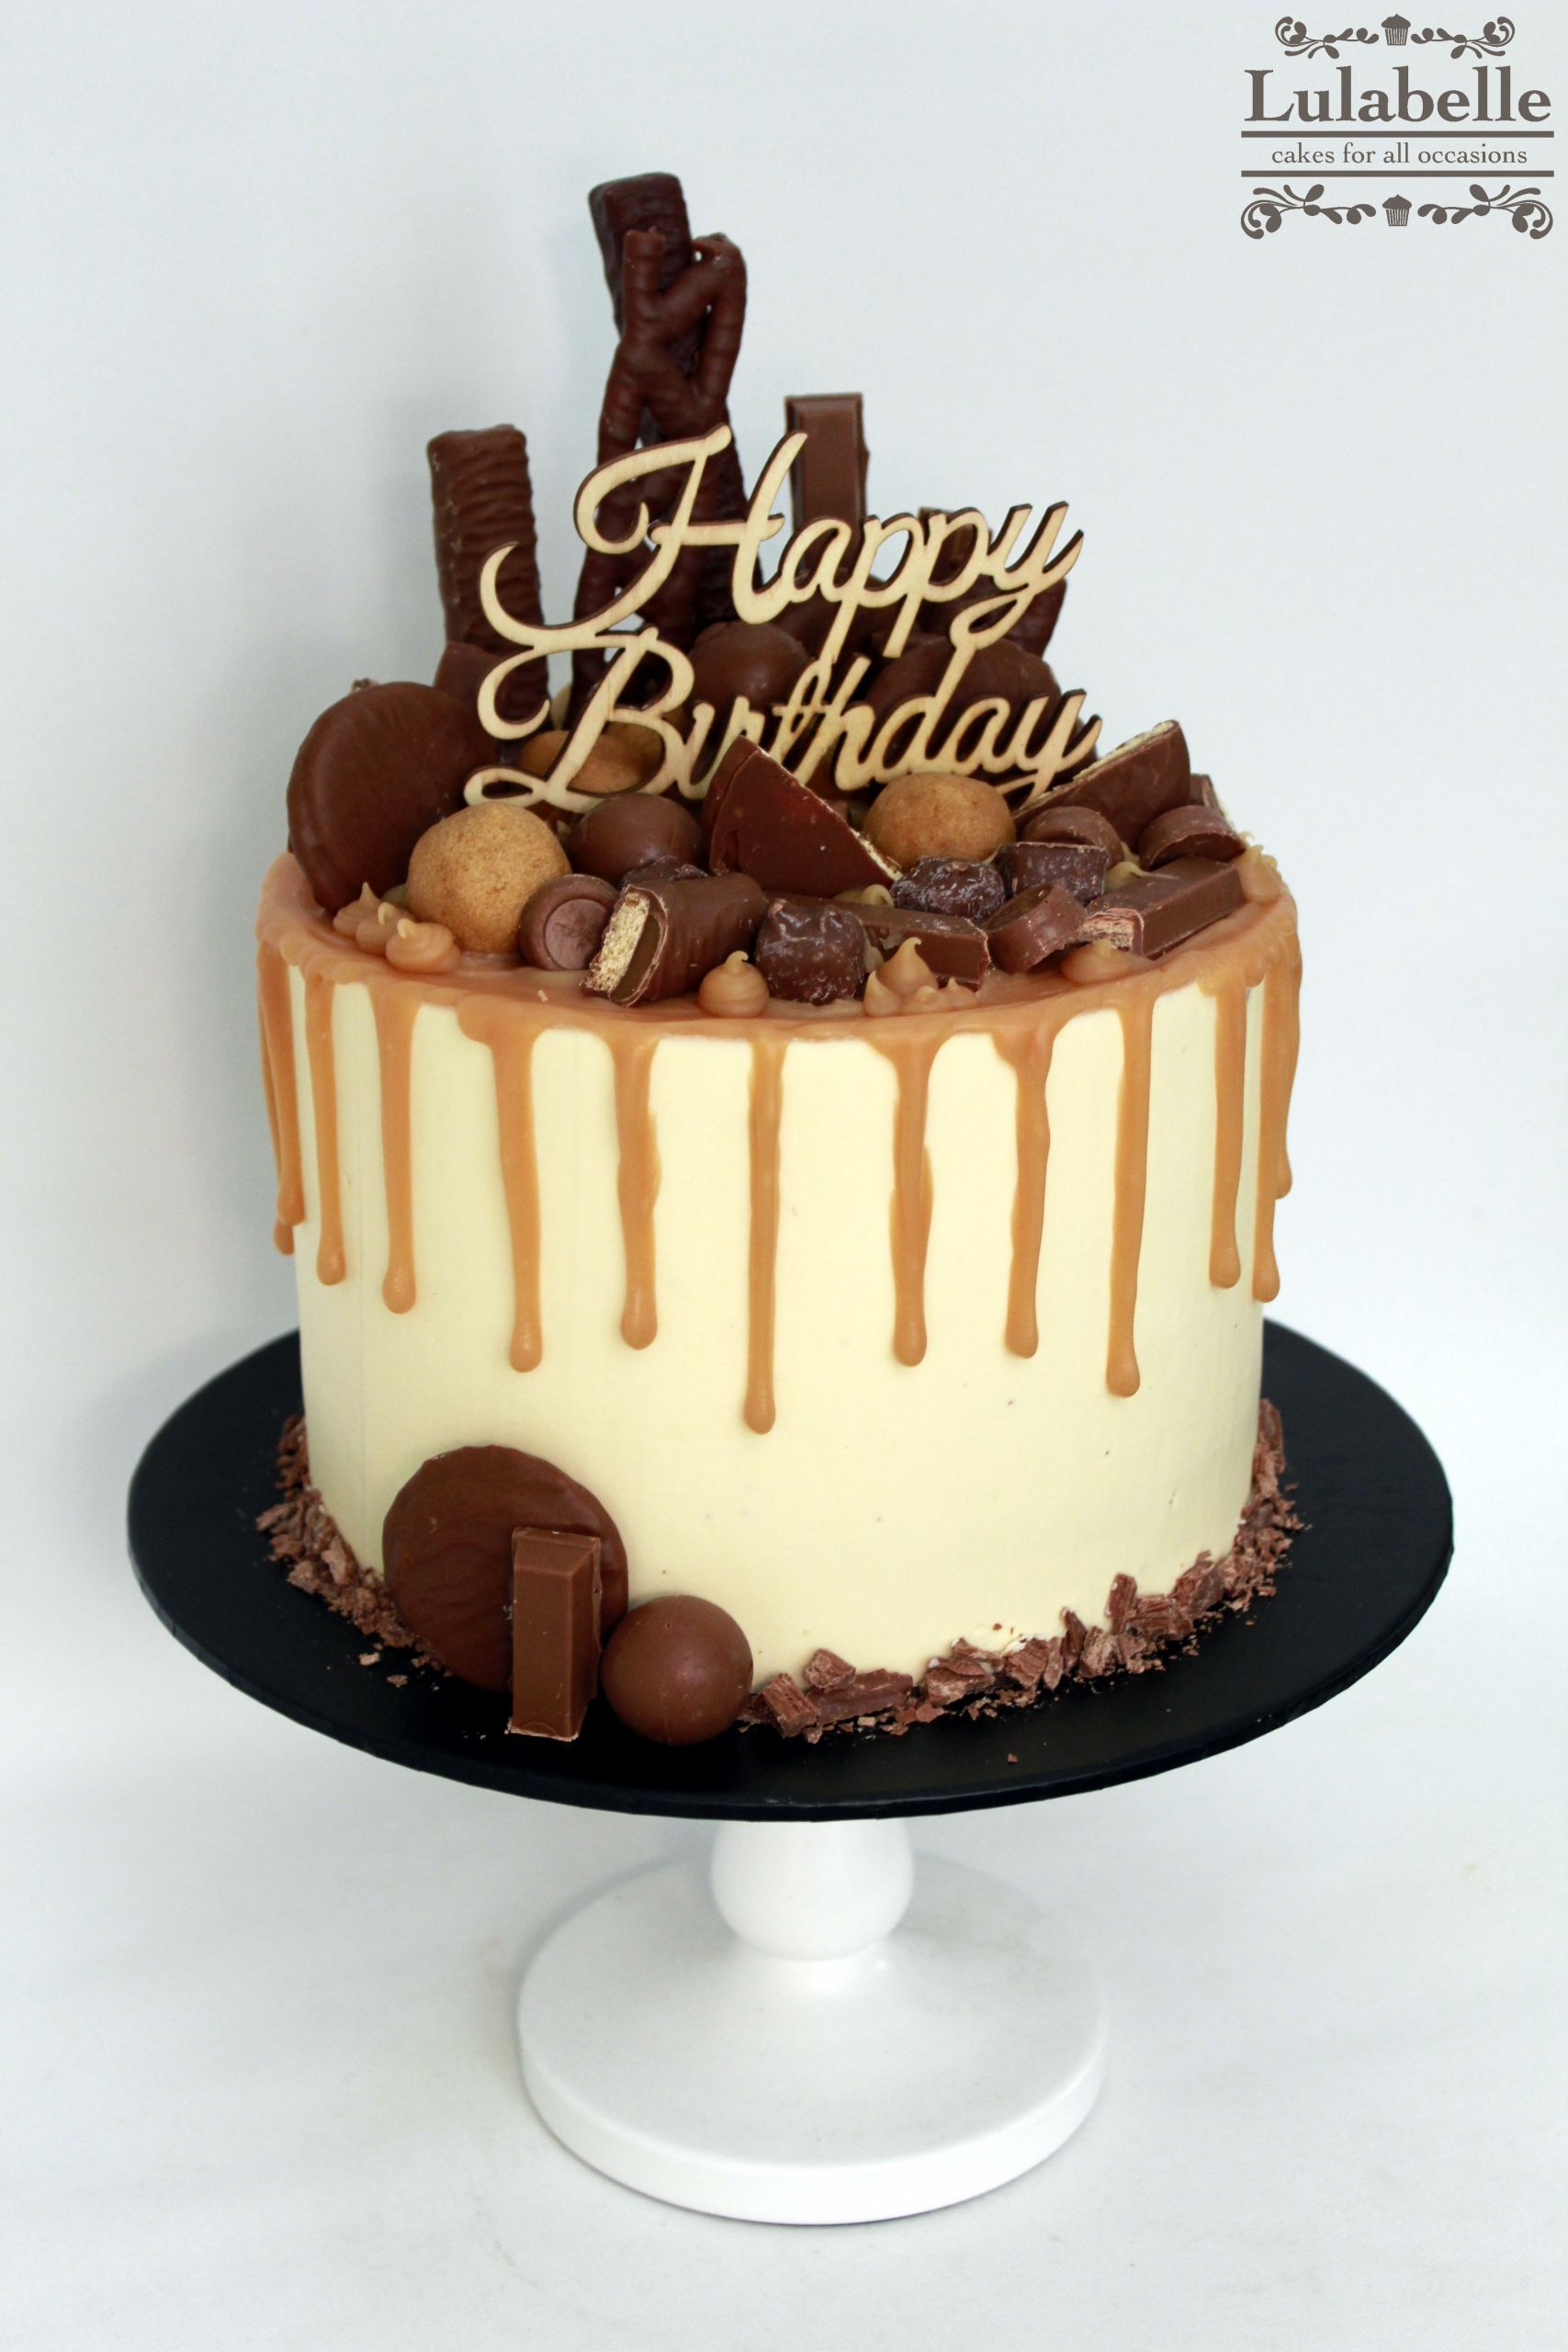 Pictures Of Birthday Cakes For Men
 Cakes for Men Lulabelle